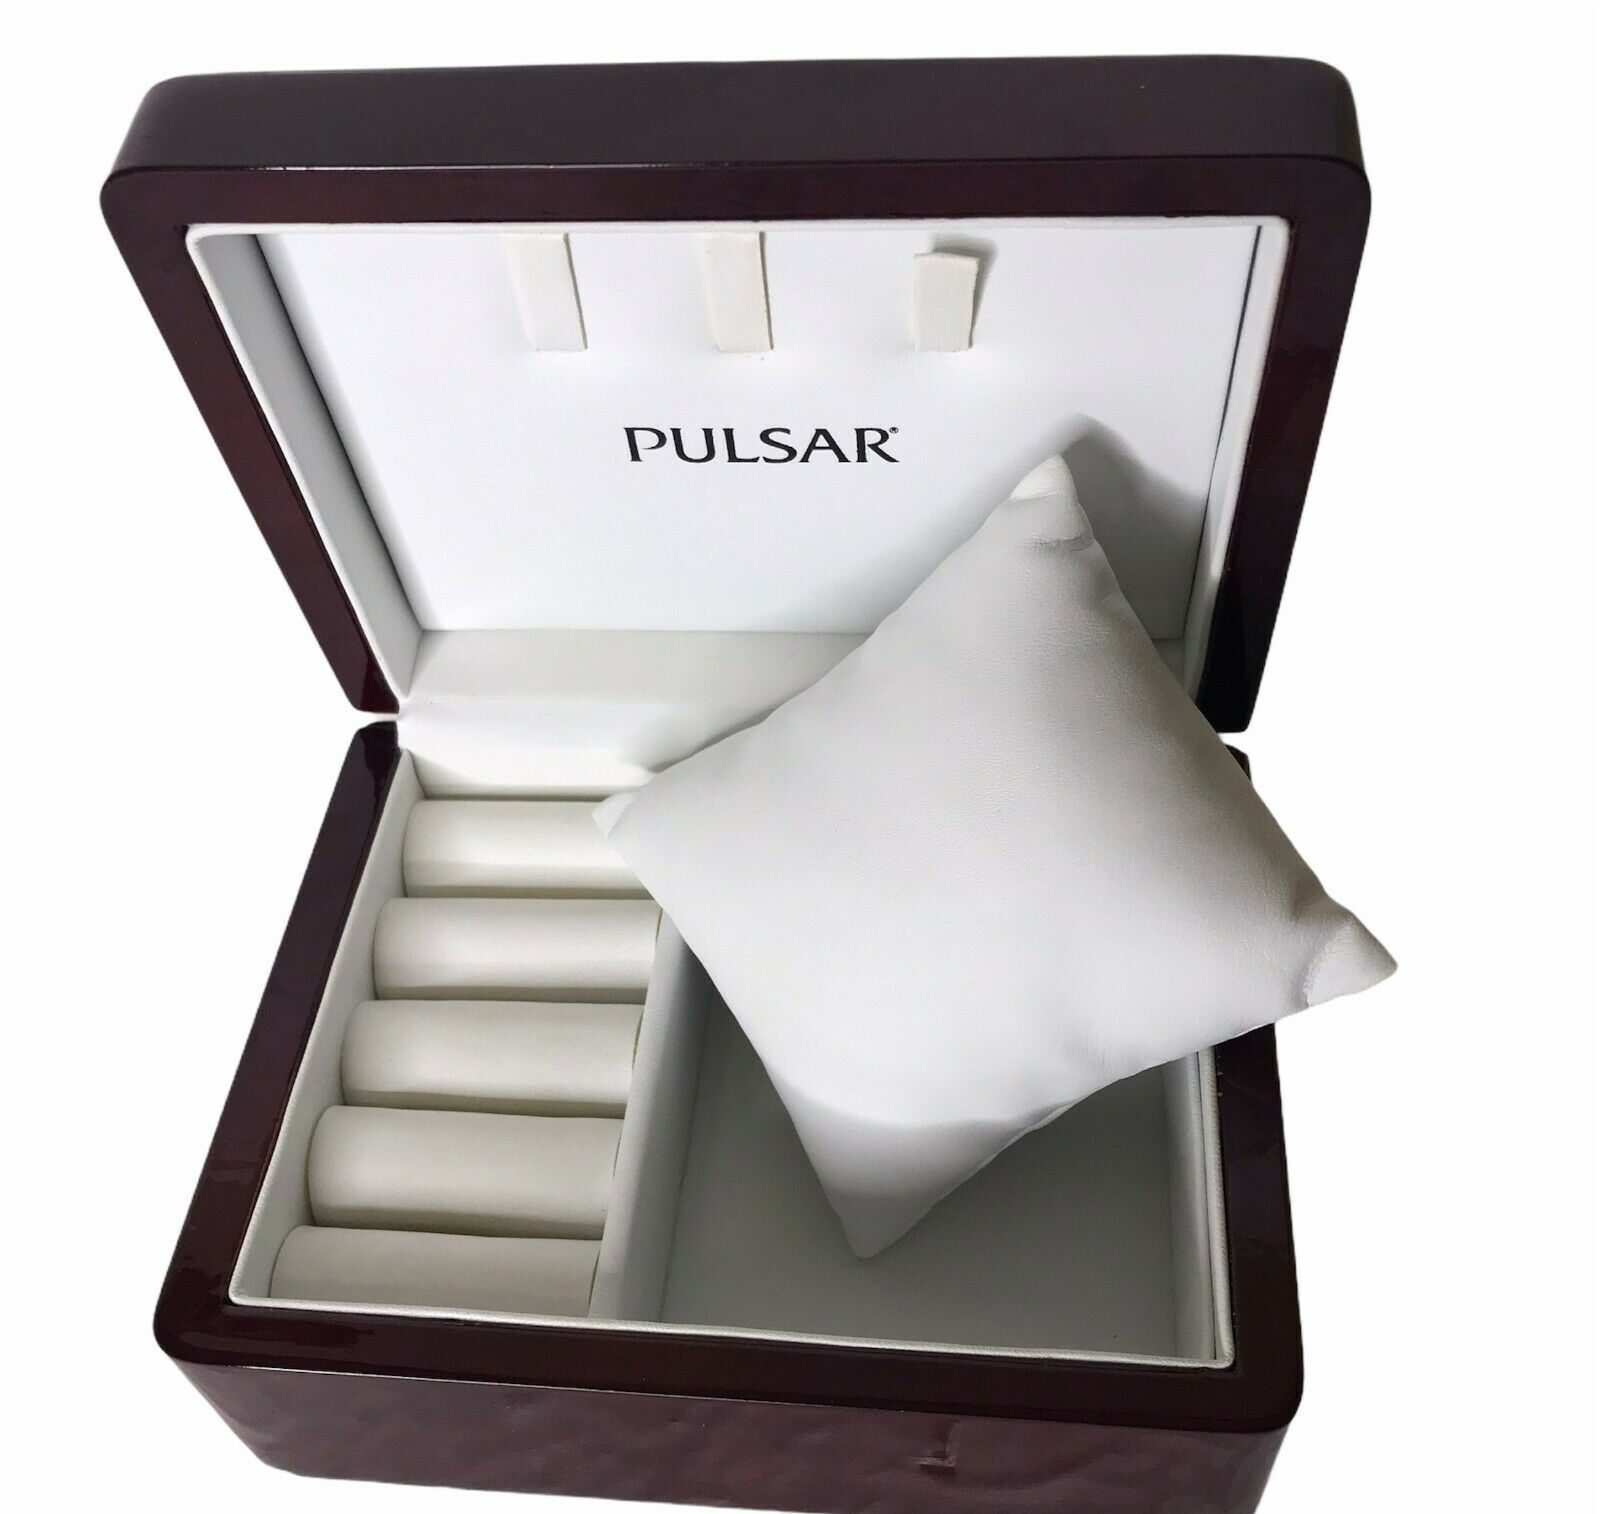 Pulsar Lacquered Red Wood Box Presentation Watch Jewelry Display Pillow